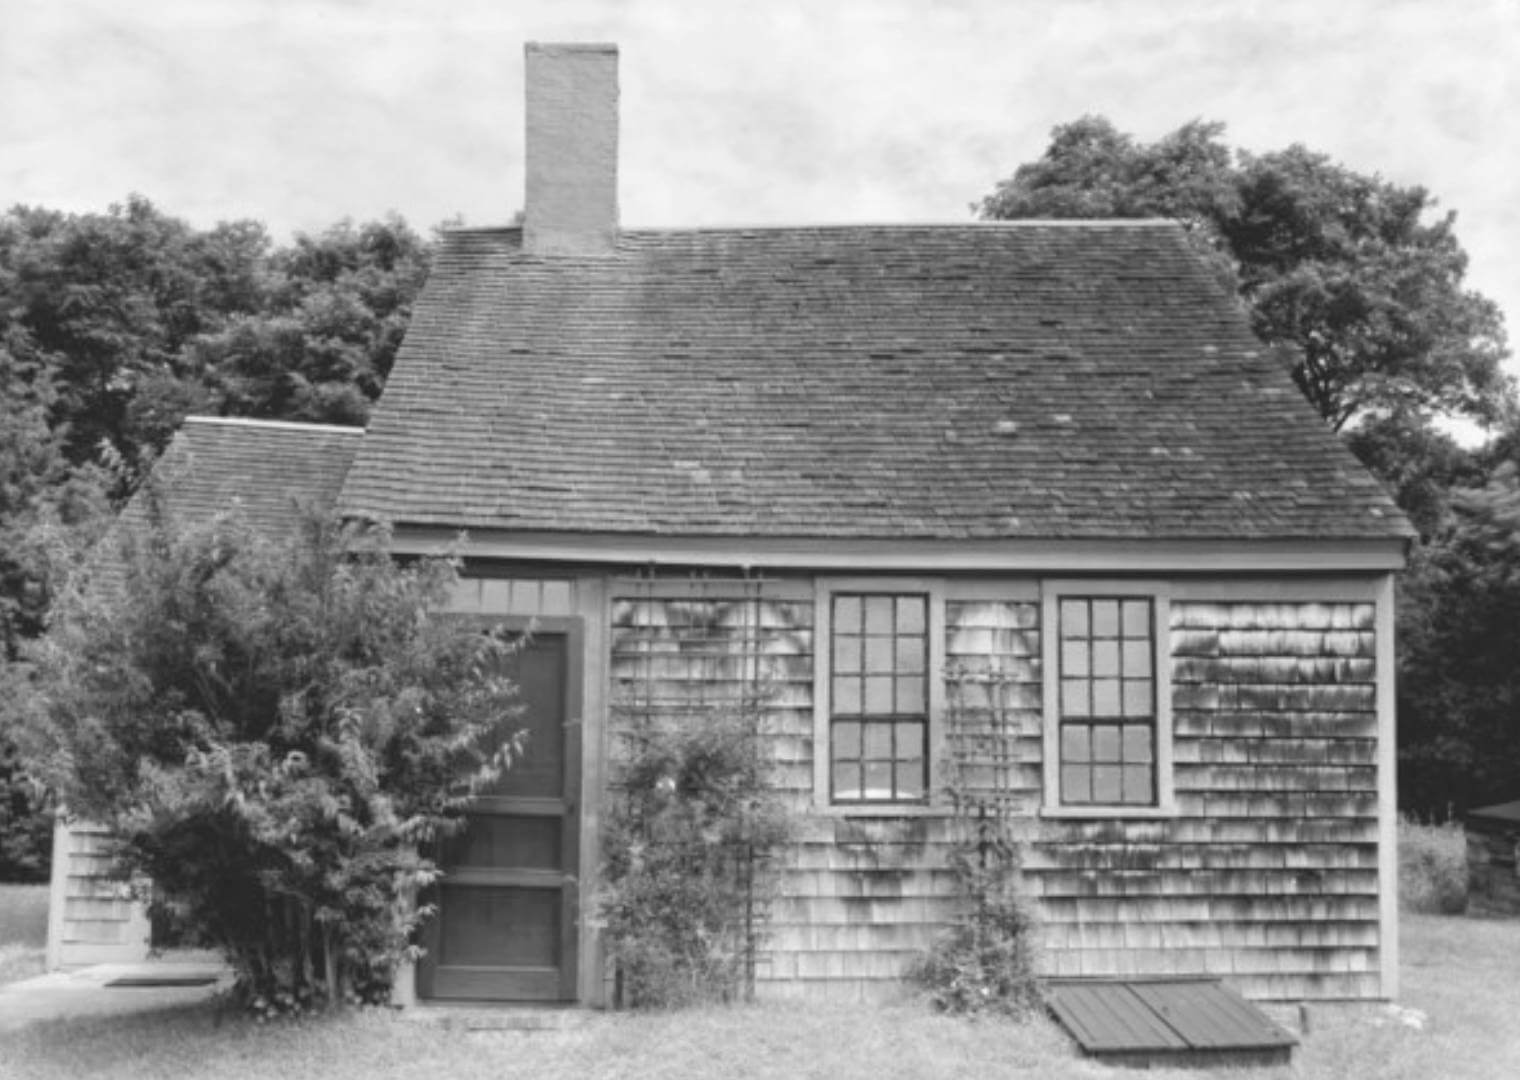 The Colonial Revival movement lasted from 1880 to 1960. Cape Cod architecture was one of the last colonial-era styles to be revived during this movement, but it remained trendy for many decades.